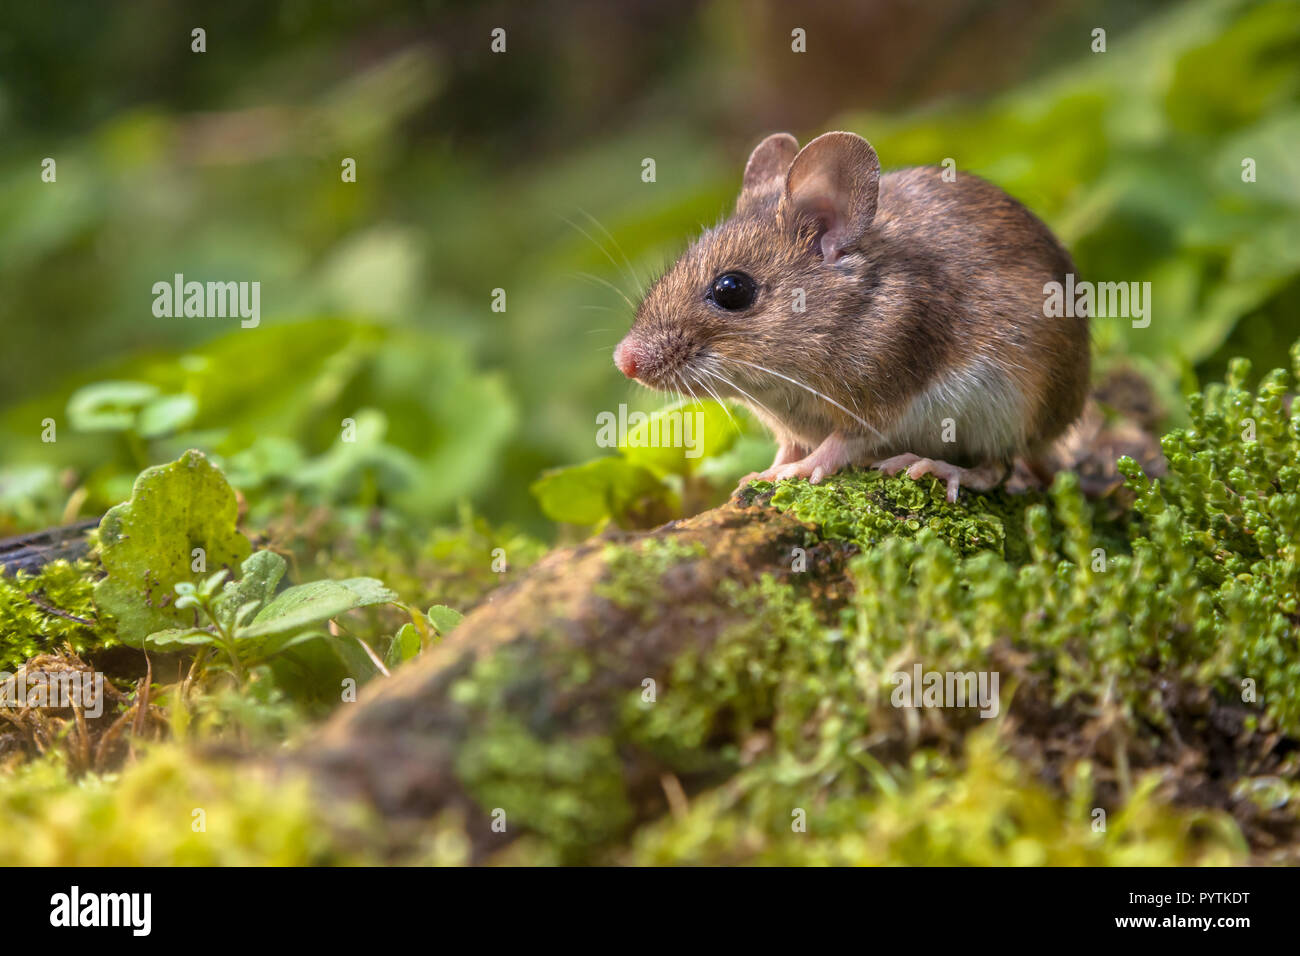 Wild Wood mouse resting on a log on the forest floor with lush green vegetation Stock Photo